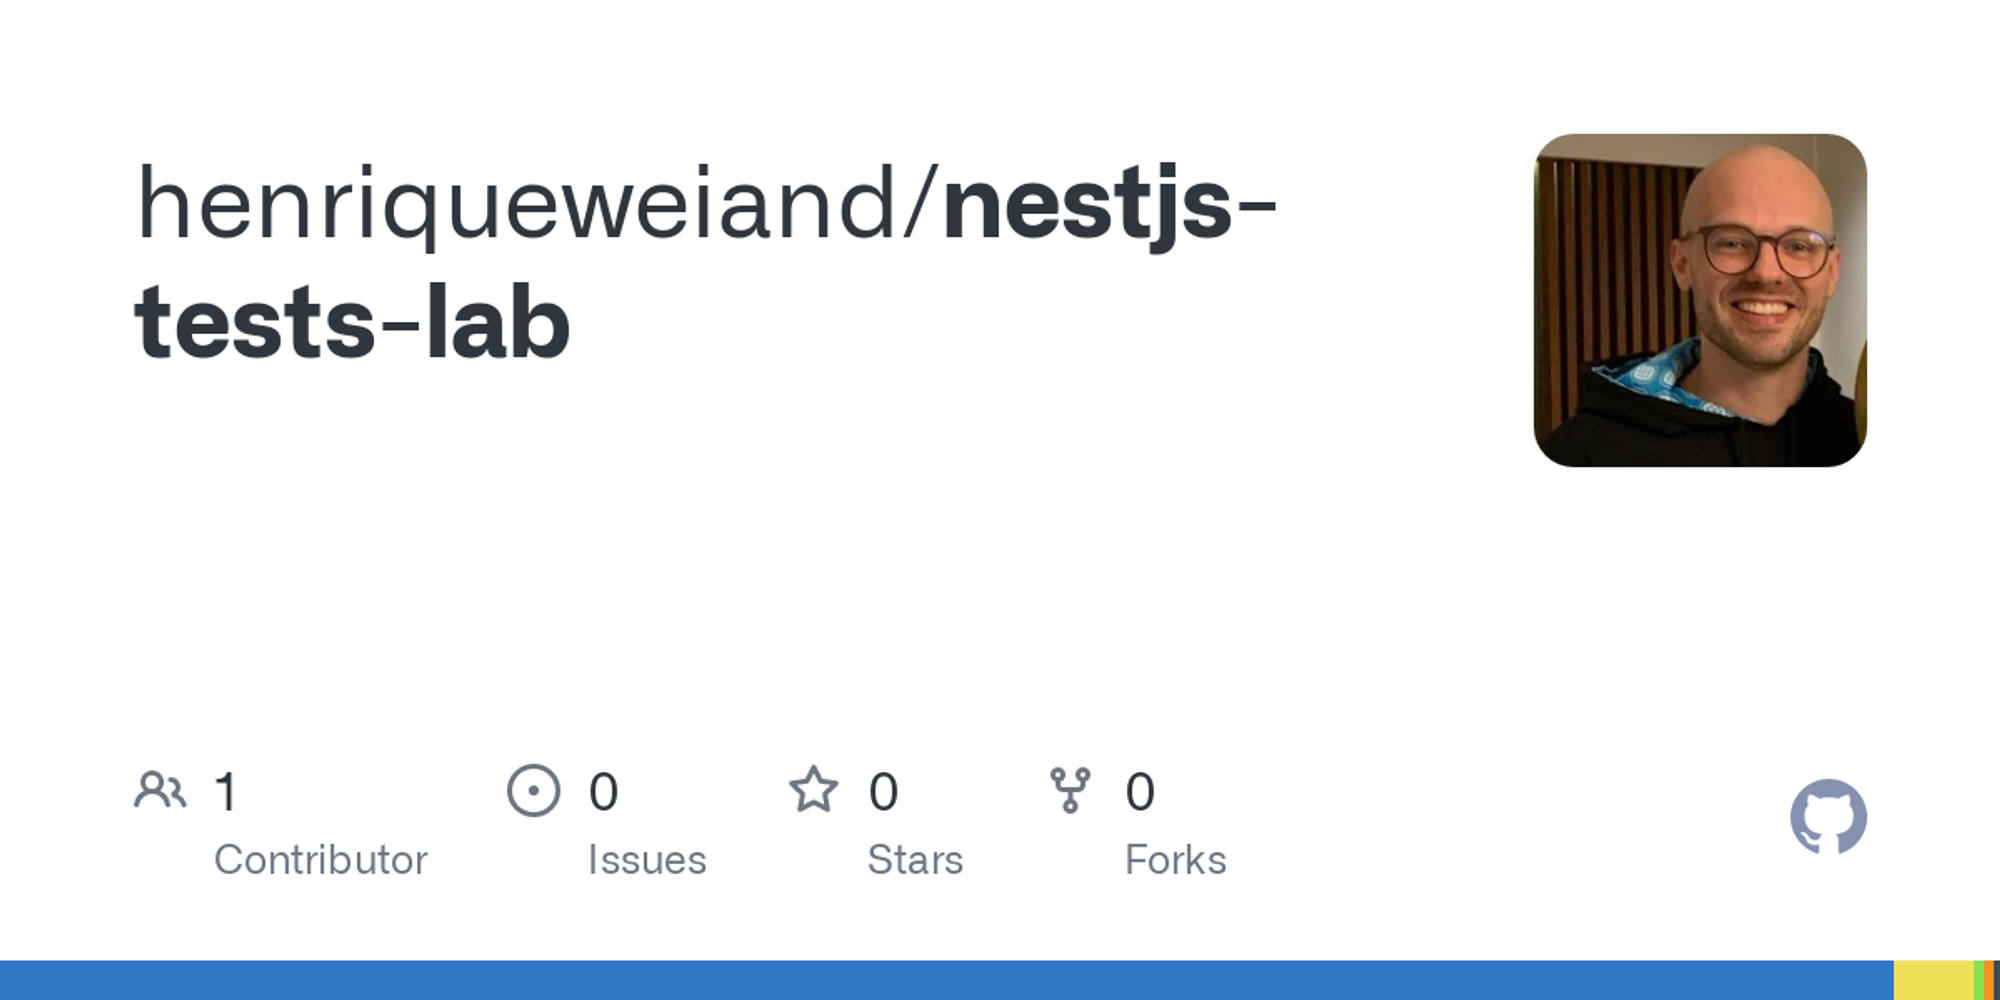 nestjs-tests-lab/currency-conversion-async at master · henriqueweiand/nestjs-tests-lab